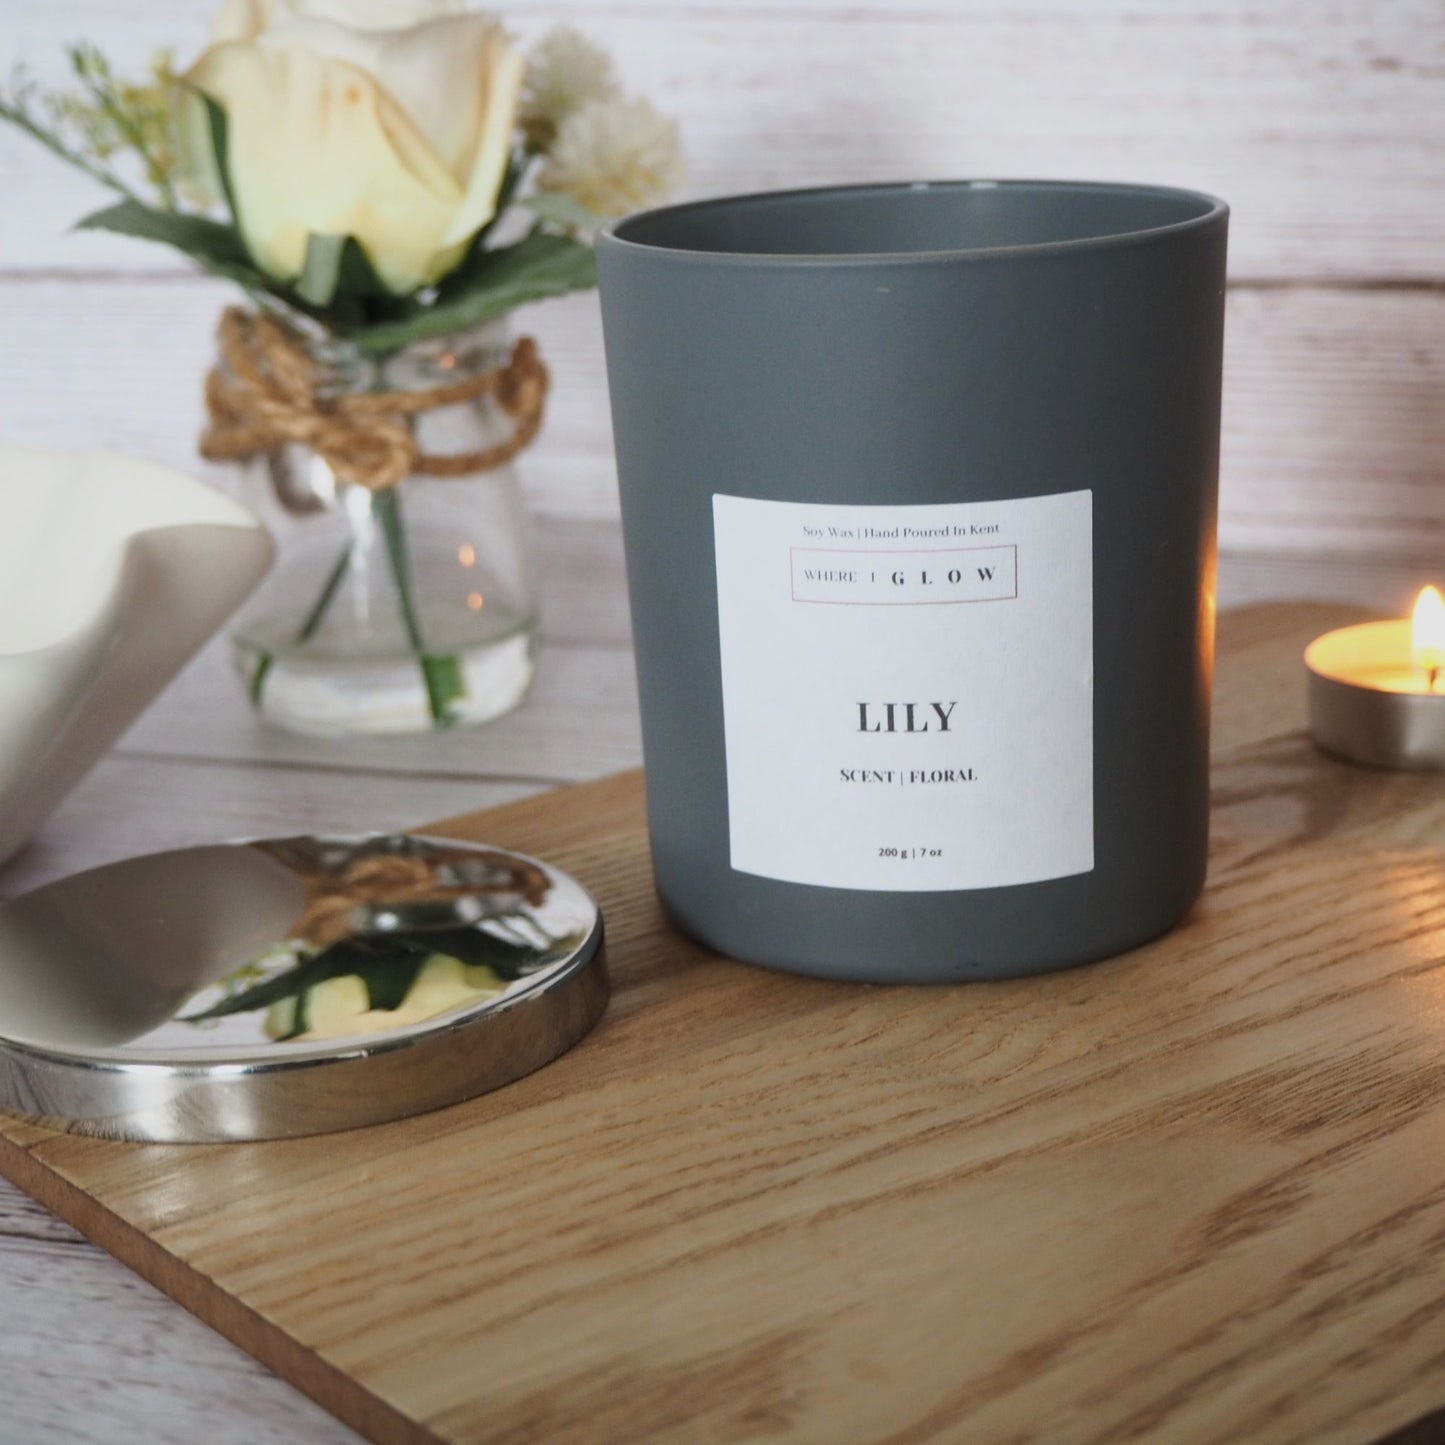 Lily Soy Candle 7 oz by Where I Glow